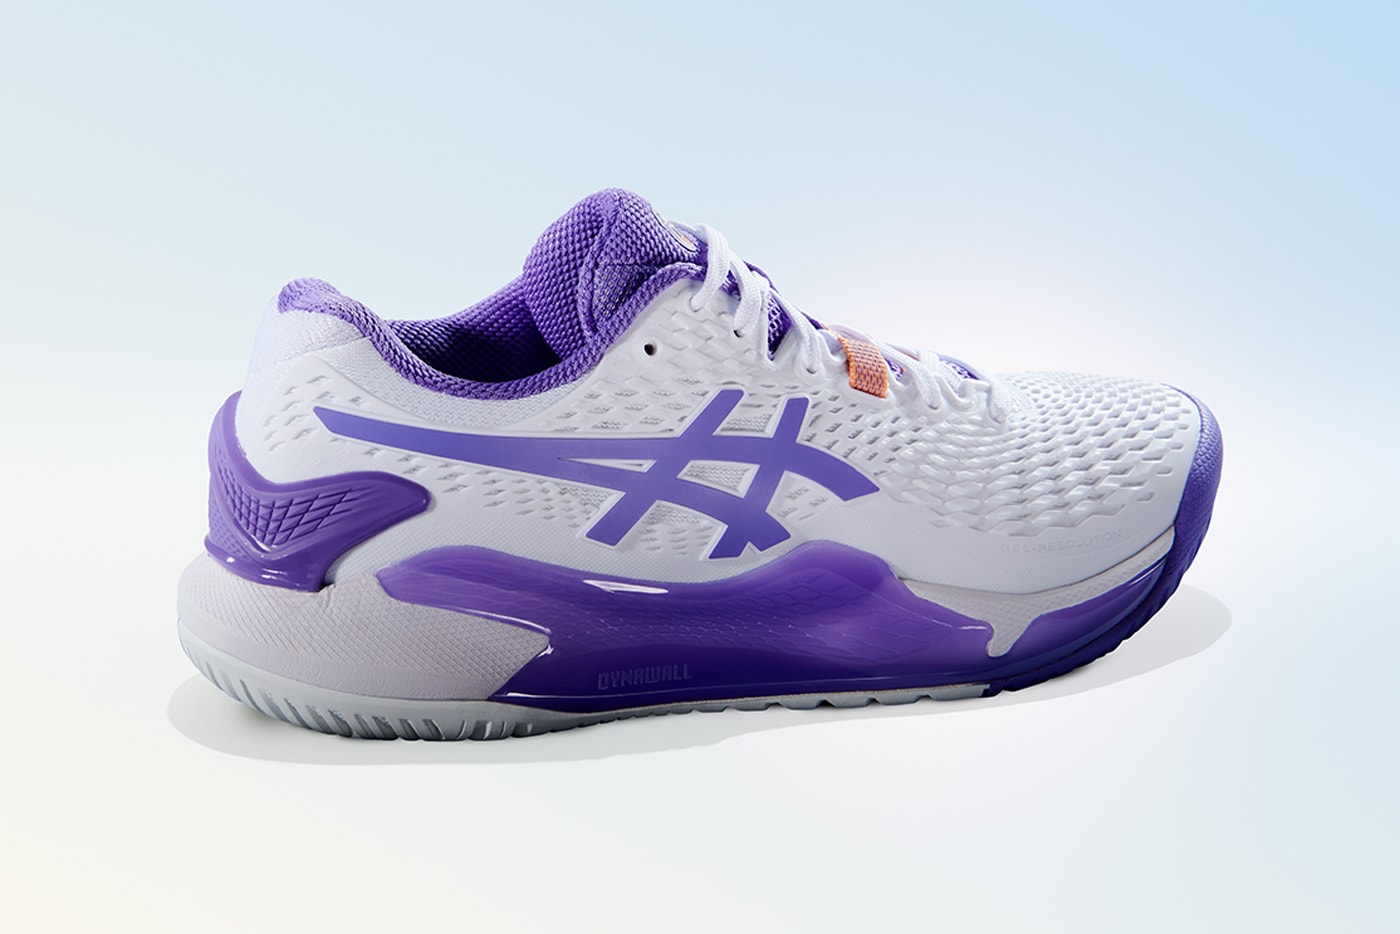 Asics Gel-Resolution 9 All Court Shoes White